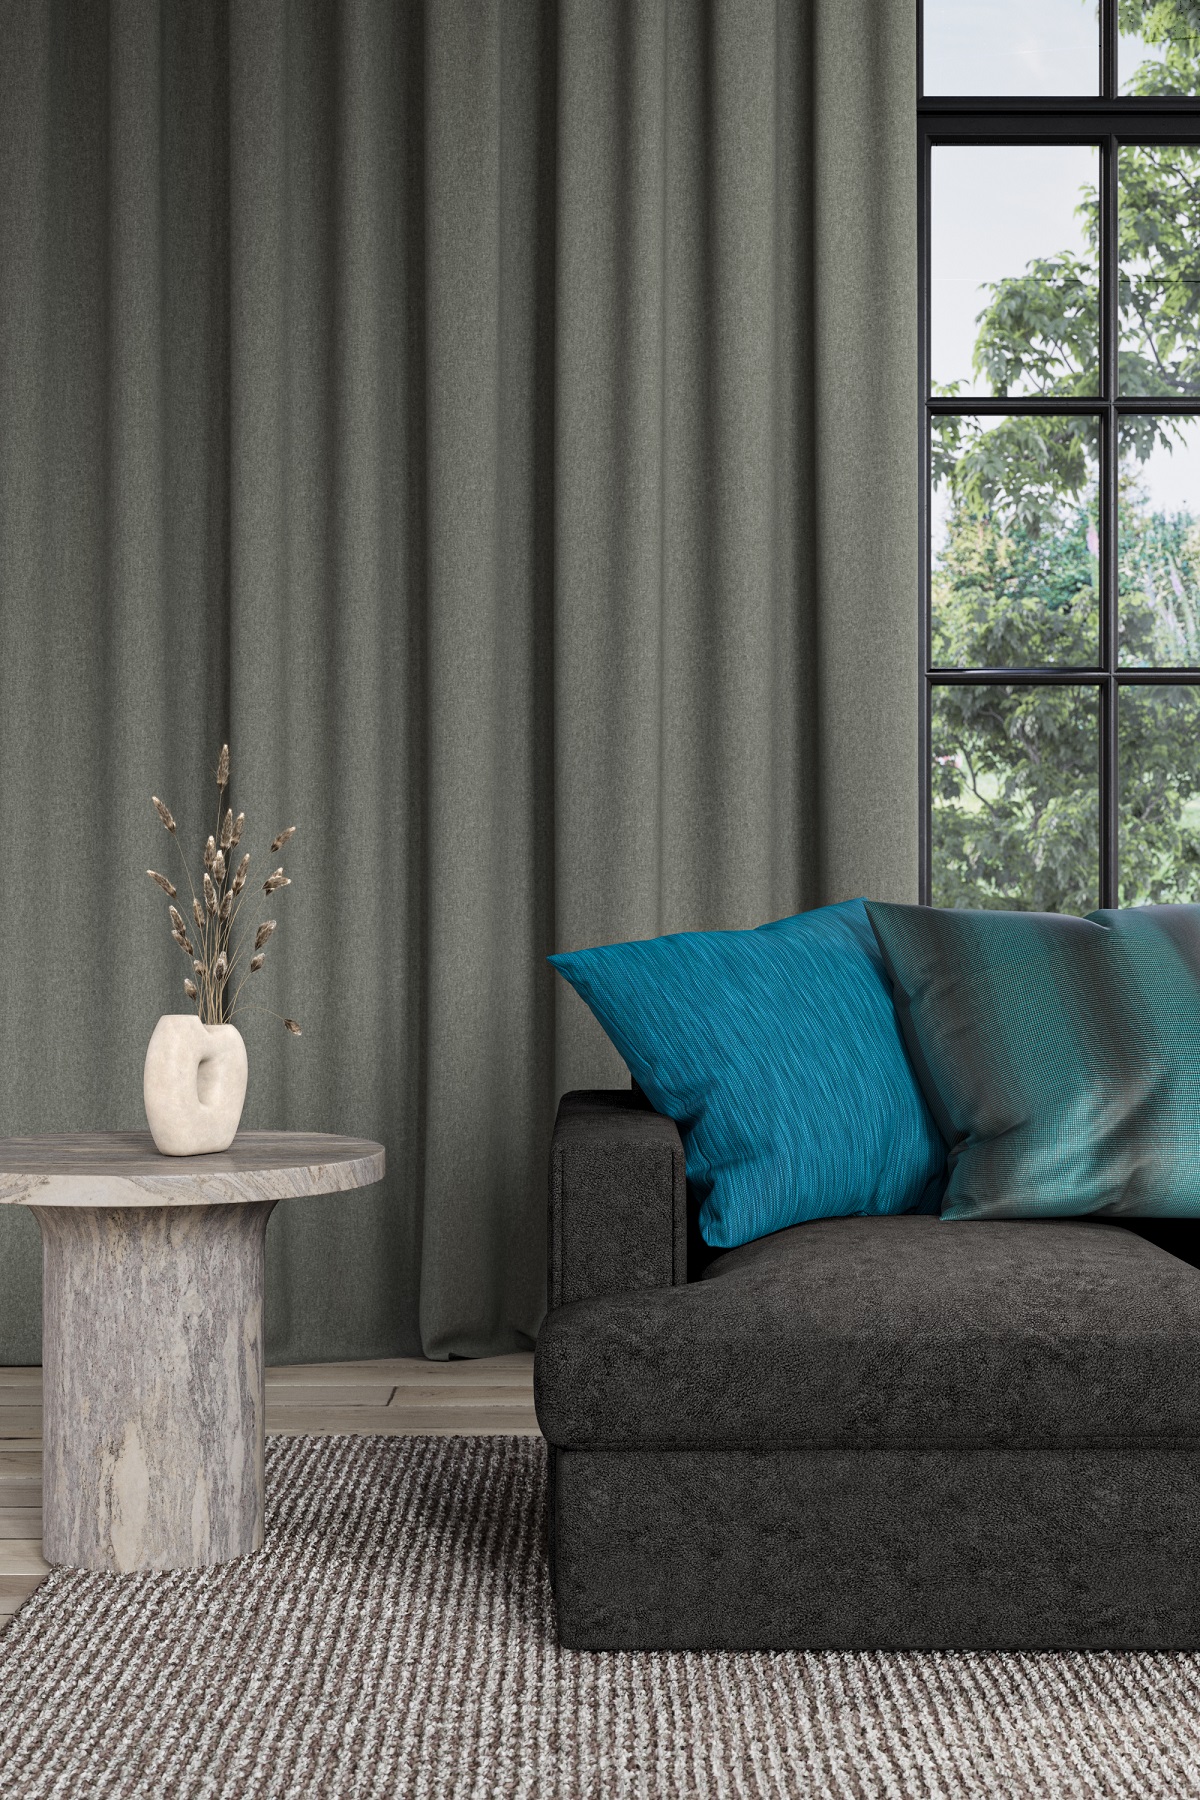 Reset blackout fabric in grey curtains behind a brown couch with blue cushions